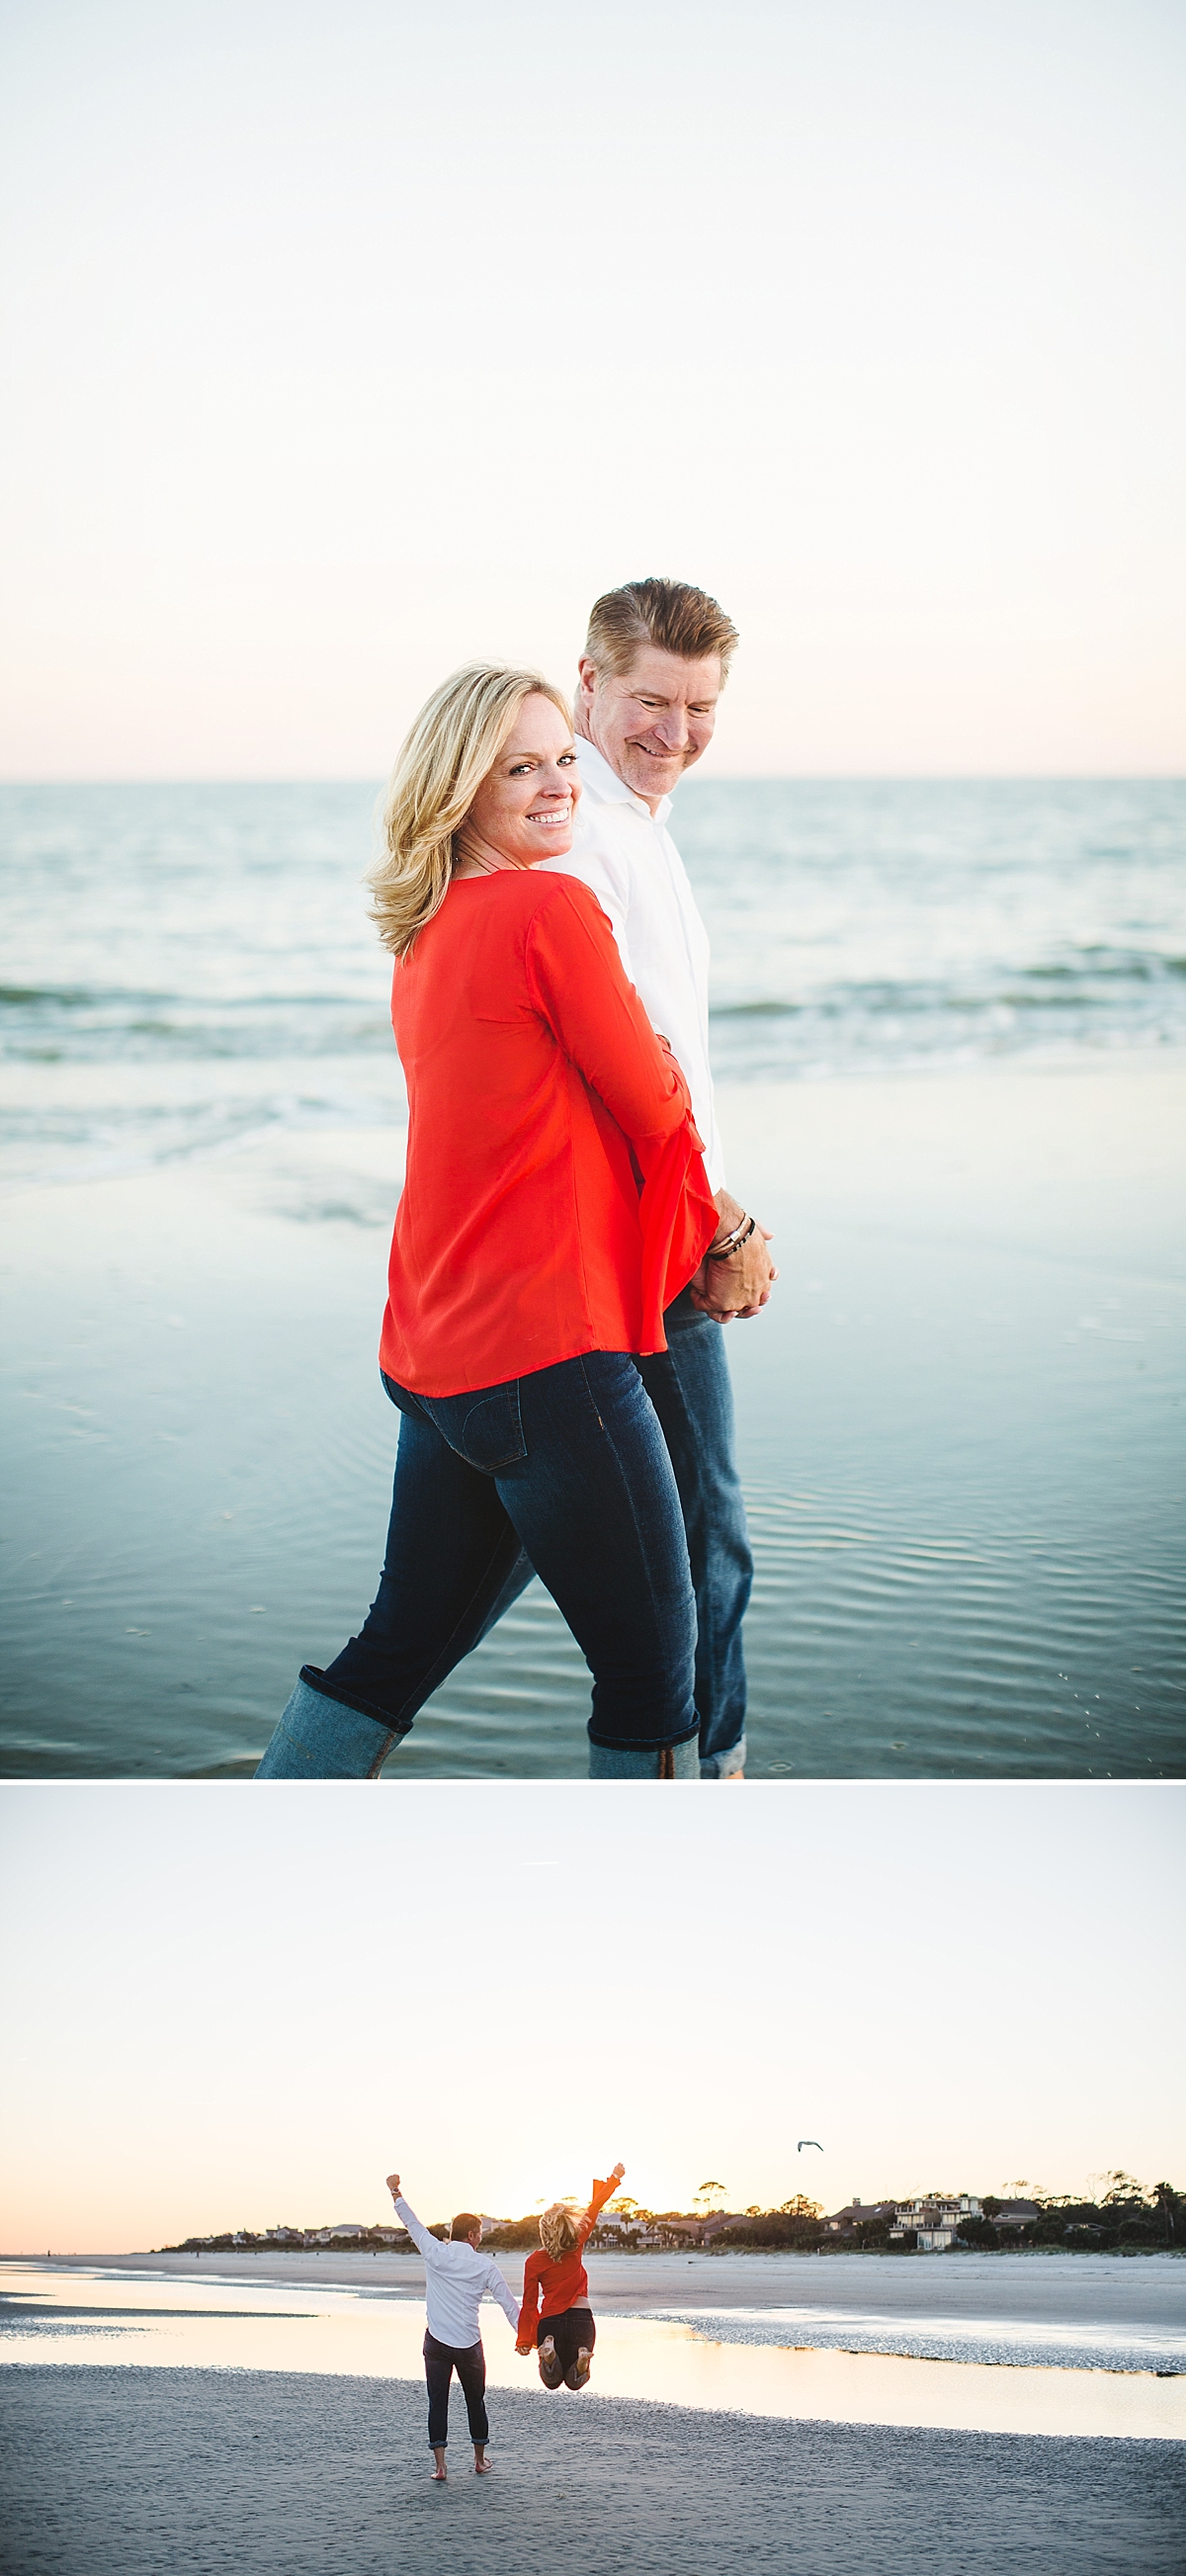 Lauren & Rob’s surprise proposal on the beach | Izzy Hudgins Photography